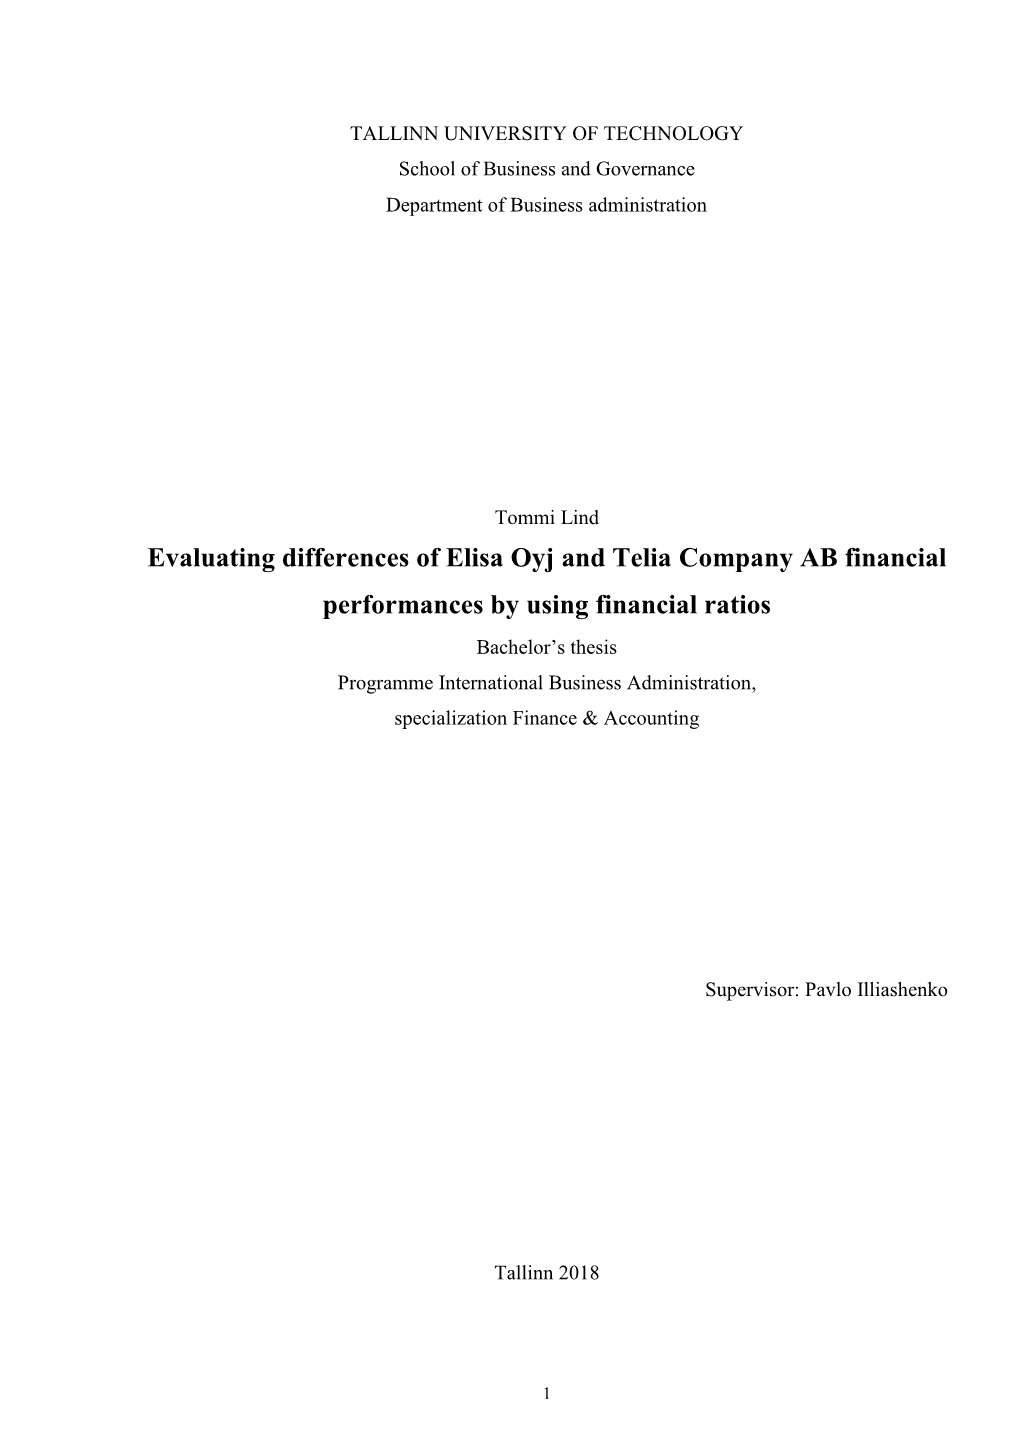 Evaluating Differences of Elisa Oyj and Telia Company AB Financial